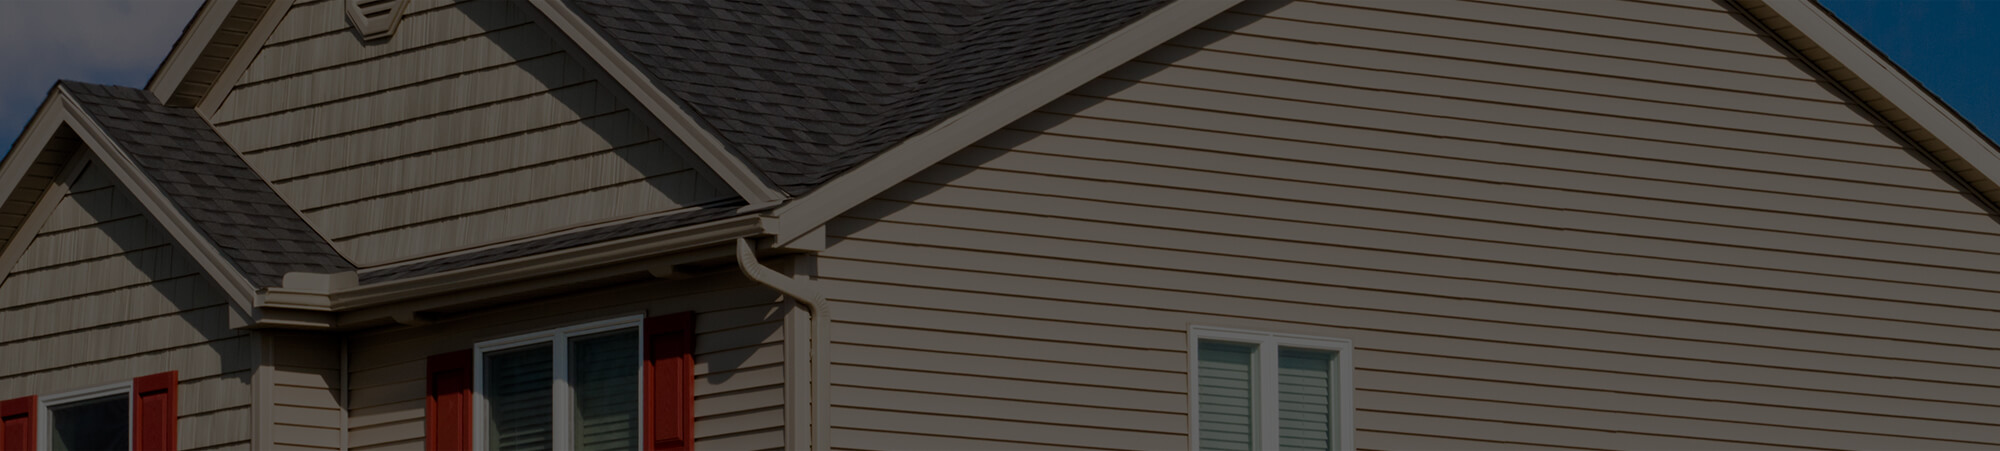 siding installation and replacement services in suamico wi